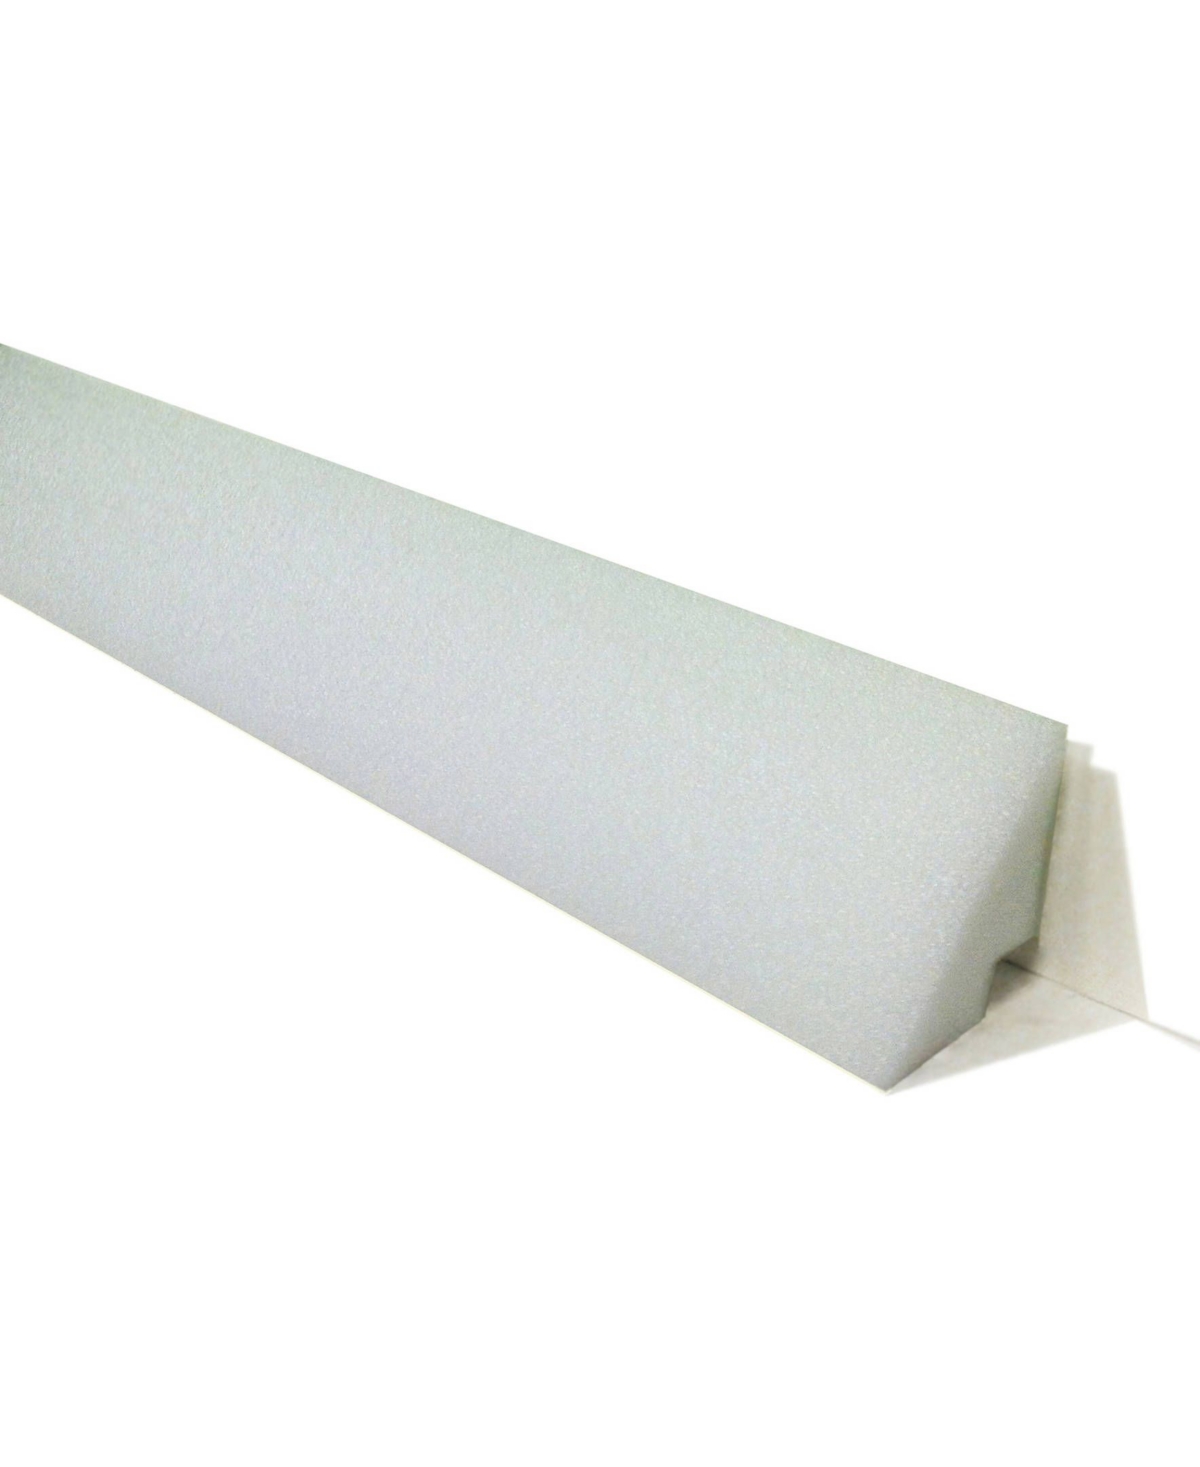 Sports 48" Peel and Stick Above Ground Pool Cover - 27 Pack - White